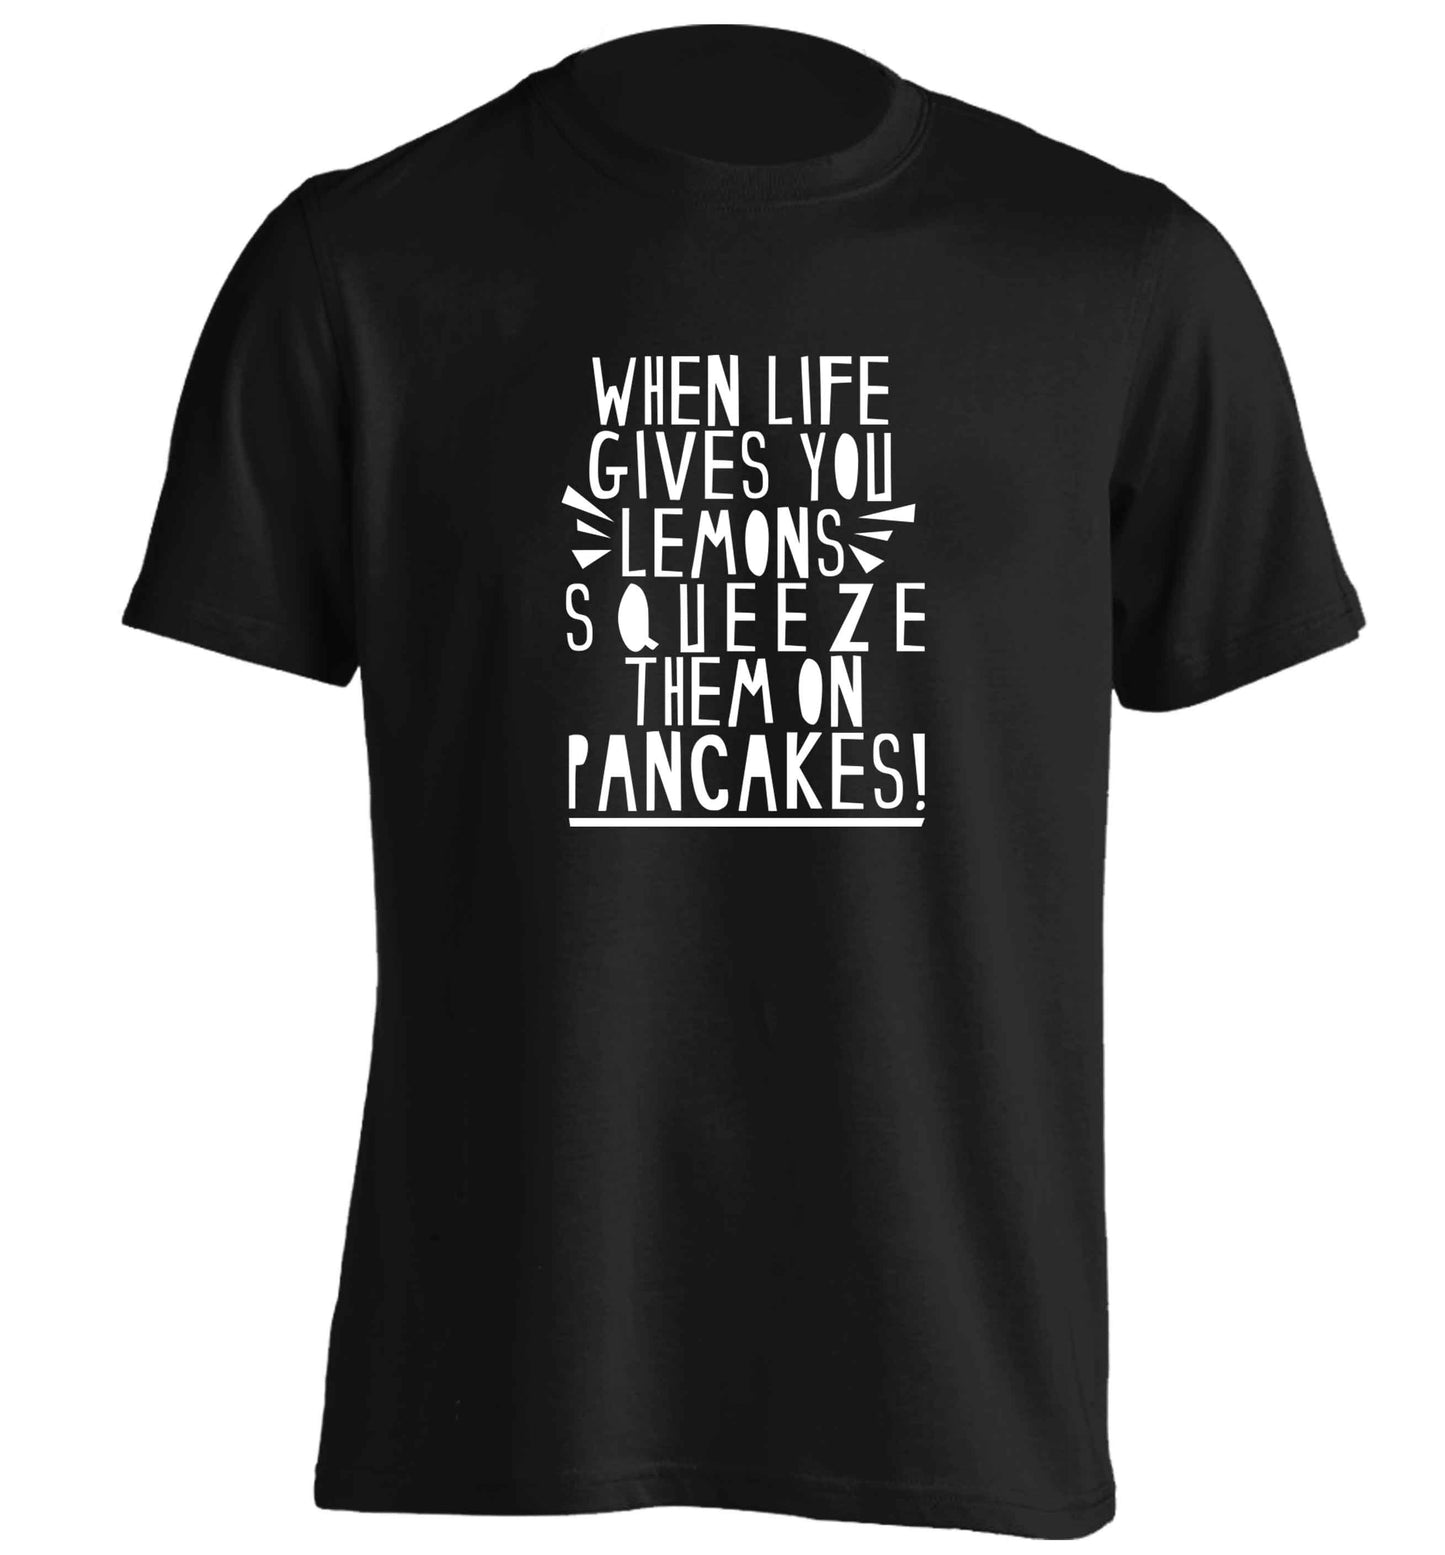 When life gives you lemons squeeze them on pancakes! adults unisex black Tshirt 2XL